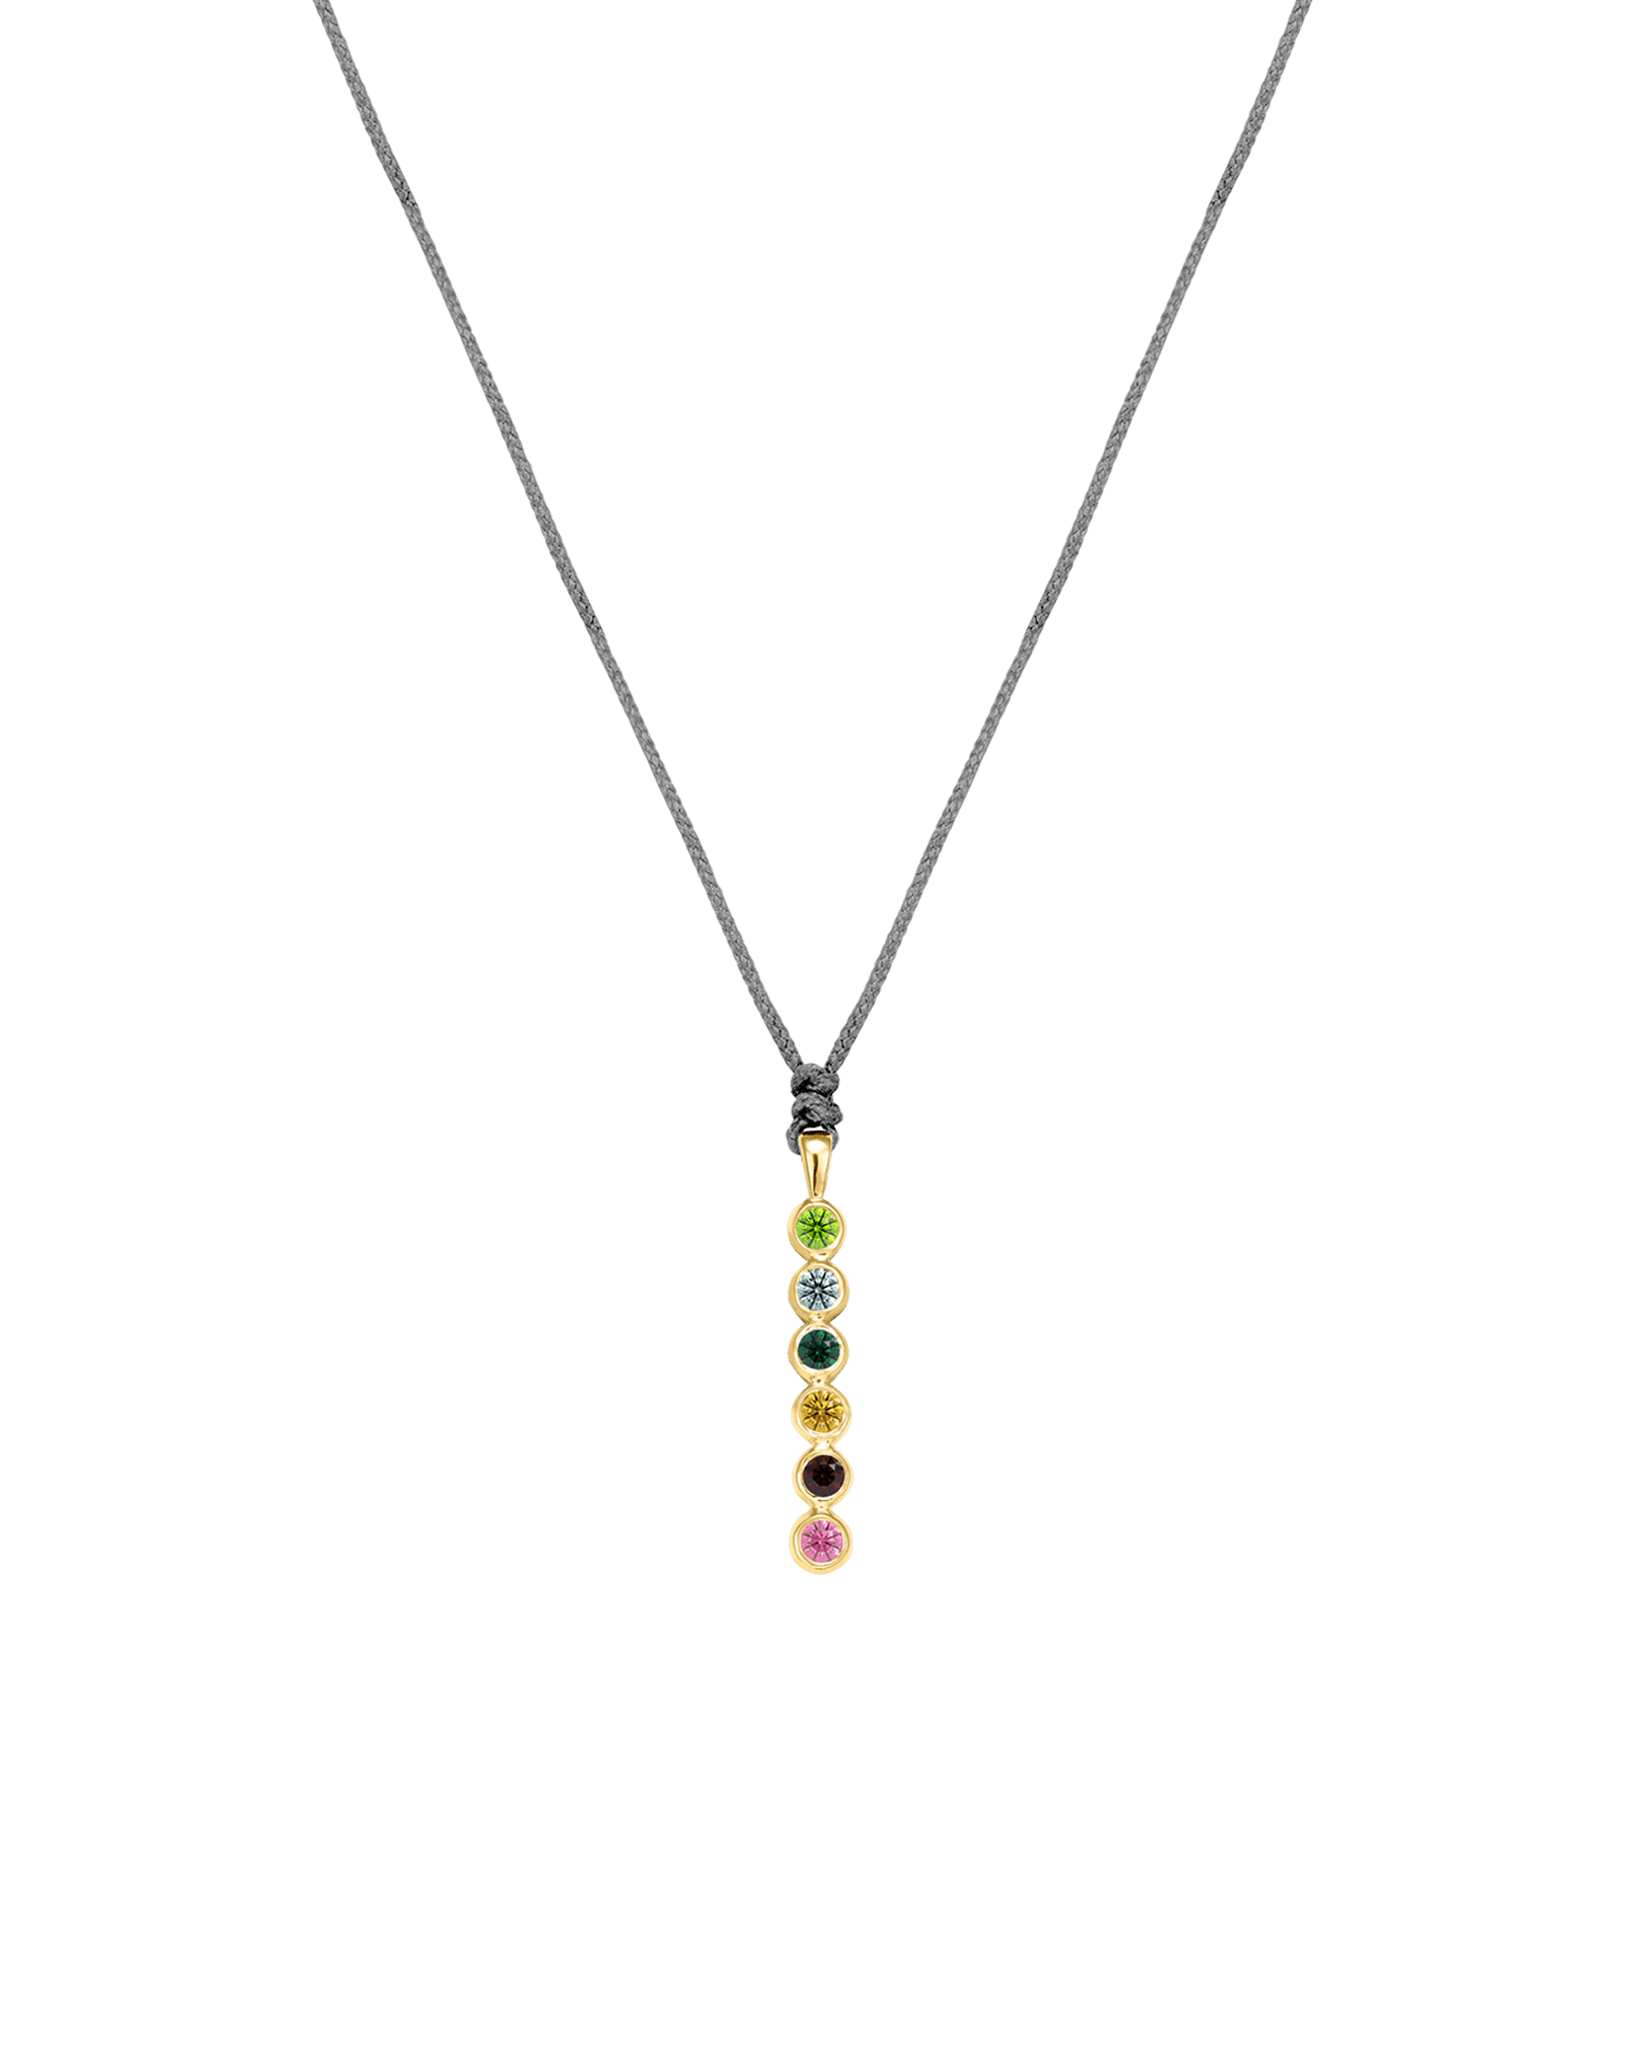 The Birthstones Bar Necklace - 14K Yellow Gold Necklaces 14K Solid Gold Grey 2 